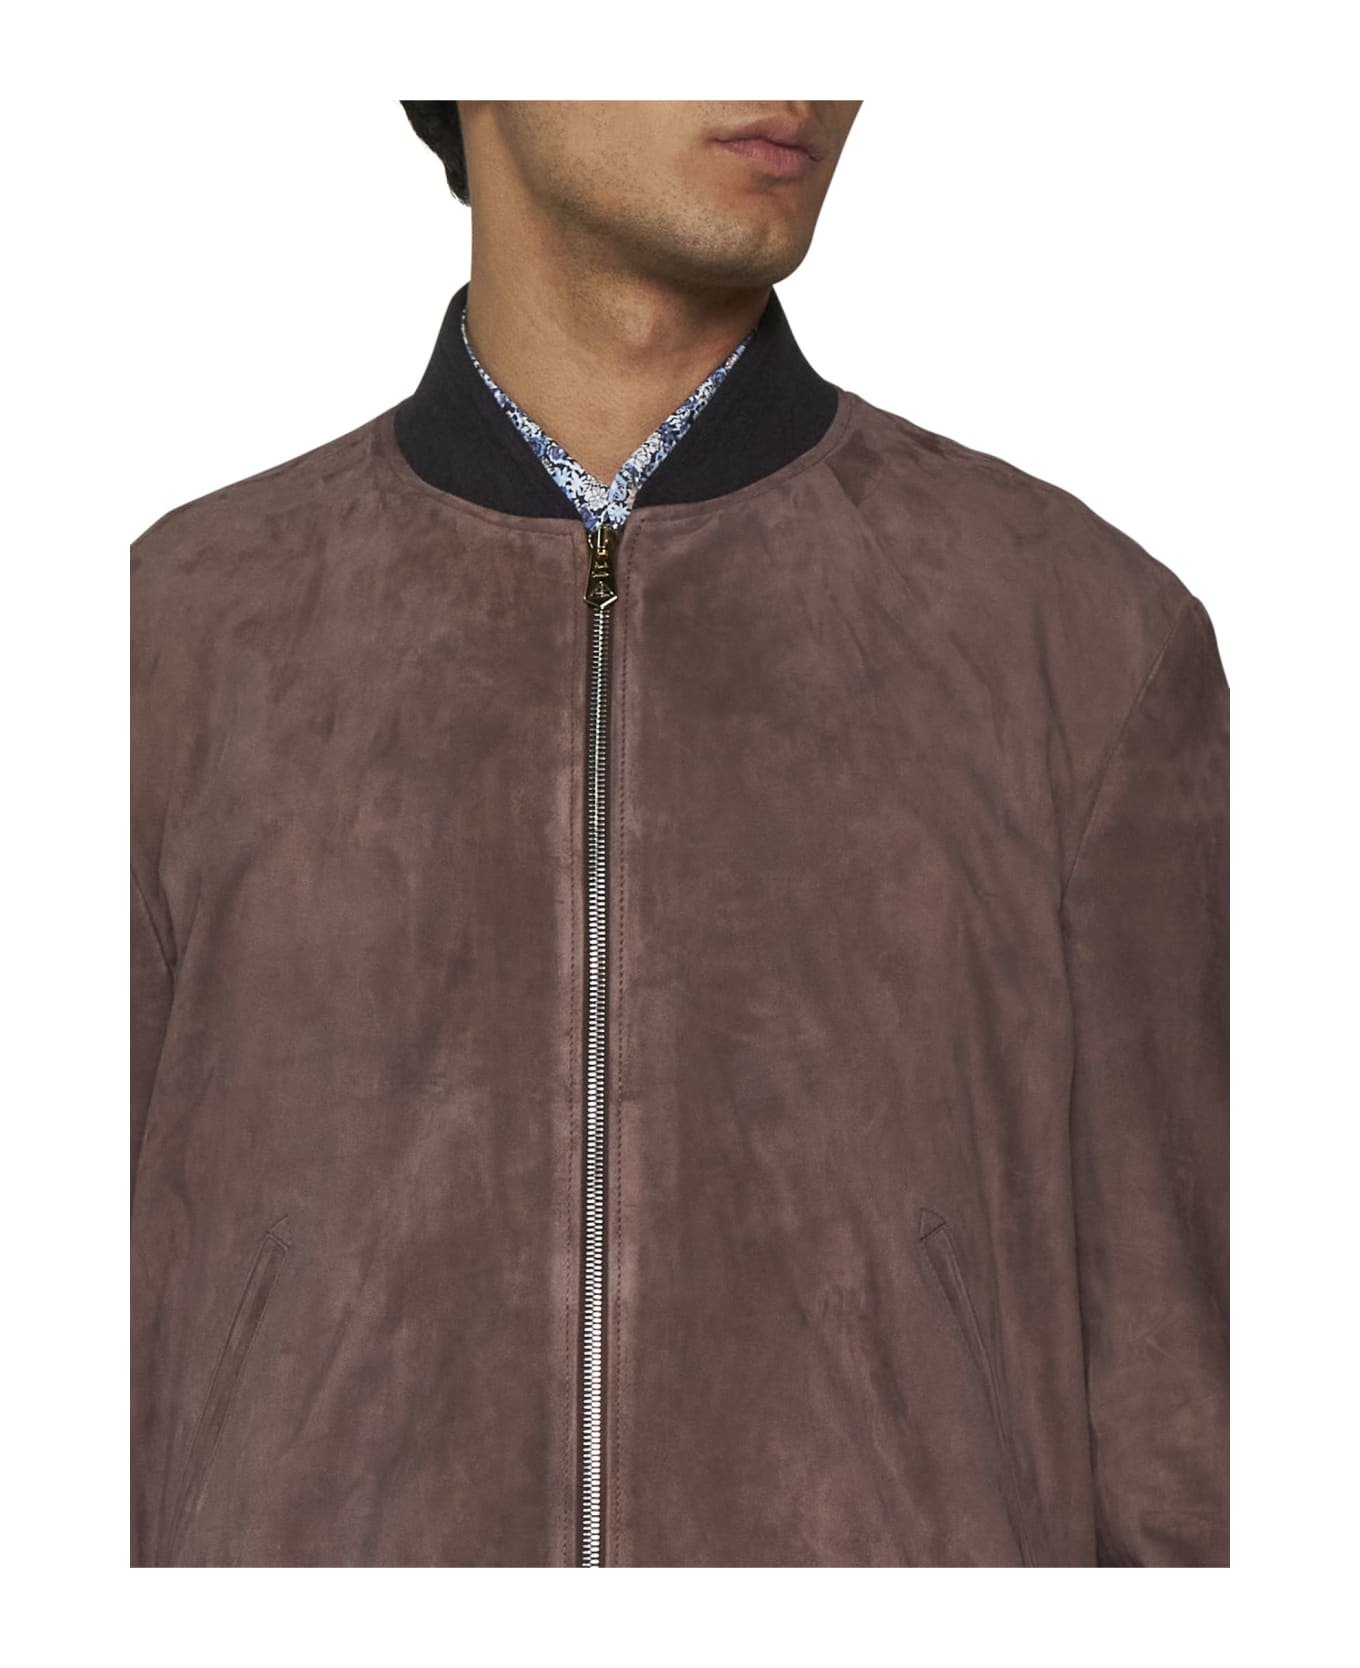 Paul Smith Suede Bomber Jacket - Brown ジャケット